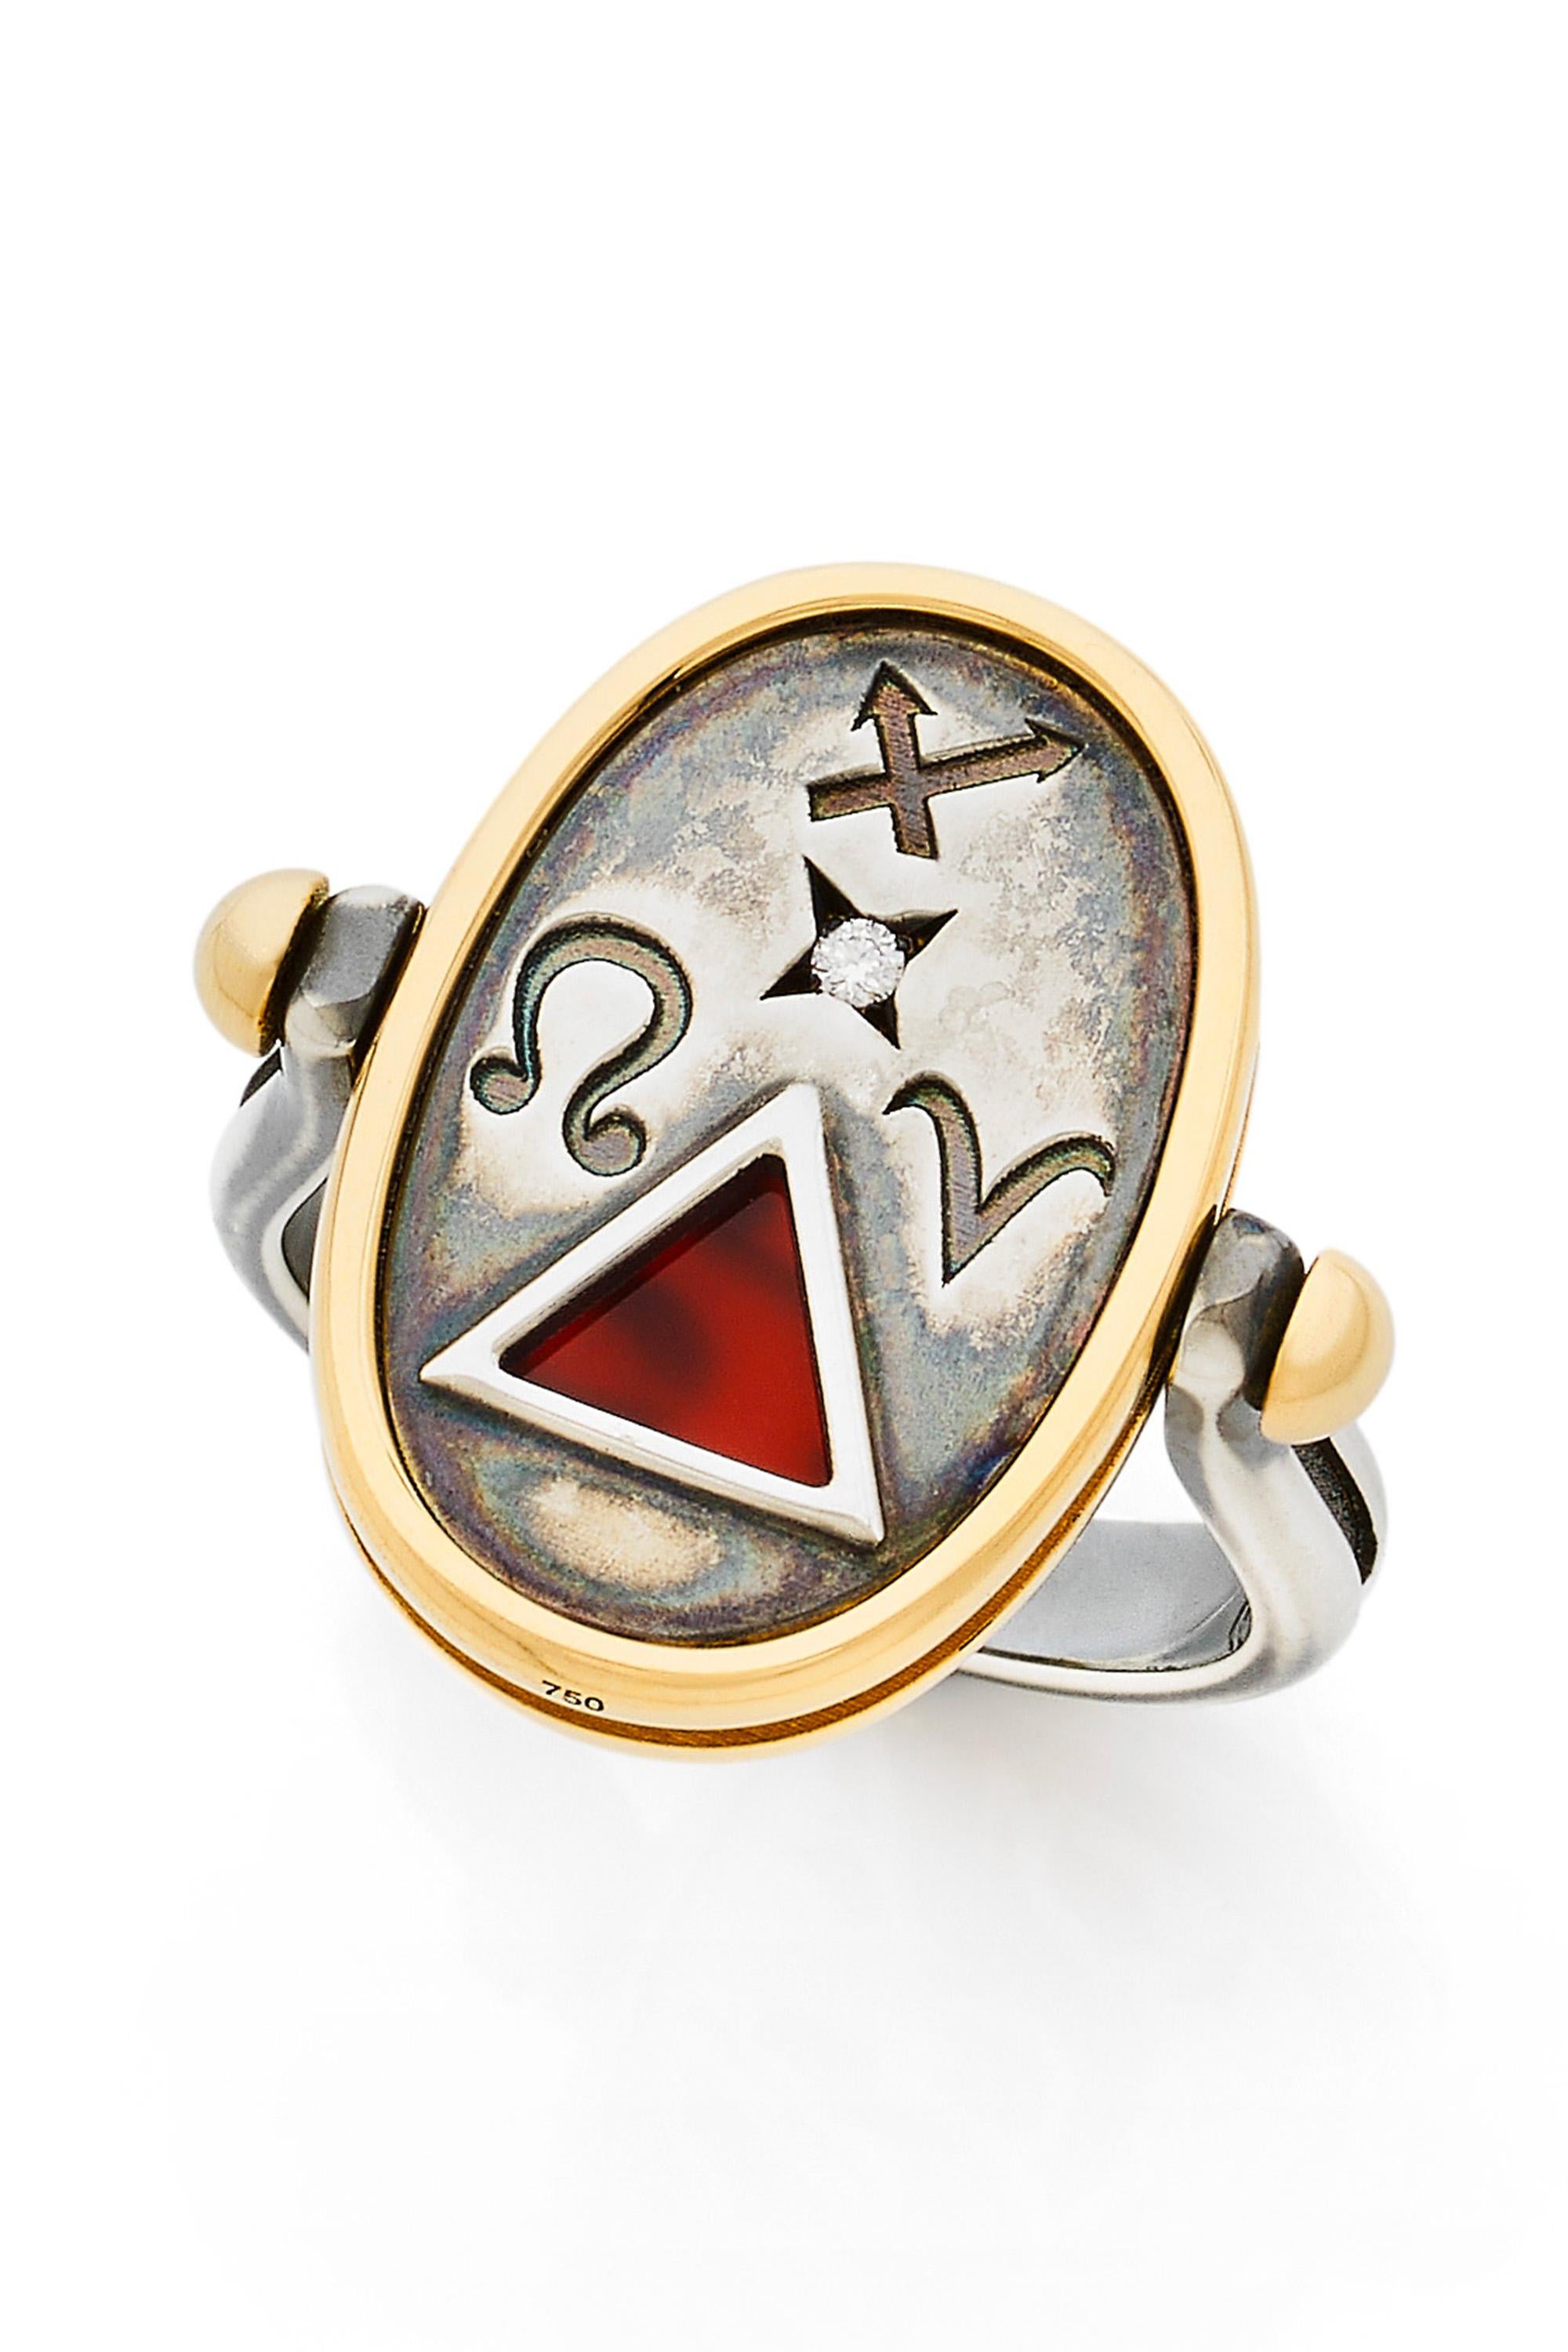 Gold and distressed silver ring. On one side, encrusted with a diamond, are engraved Fire signs (Sagittarius, Leo, Aries). On the other side is an openwork depicting a salamander on a carnelian base. 

Details:
Carnelian 
Diamond: 0.015 cts 
18k